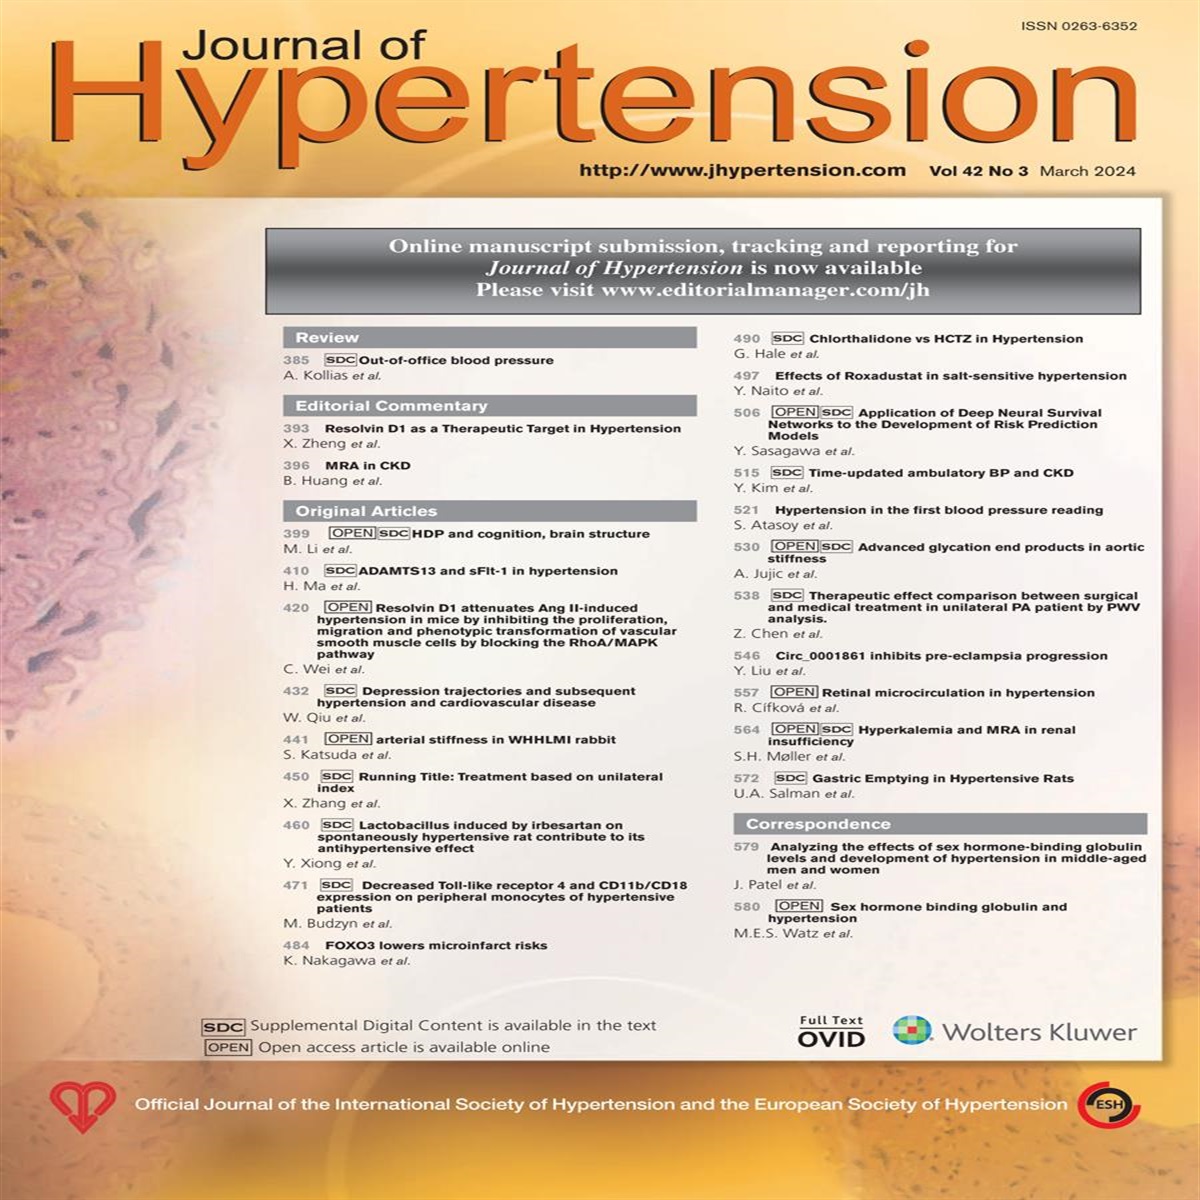 Analyzing the effects of sex hormone-binding globulin levels and development of hypertension in middle-aged men and women